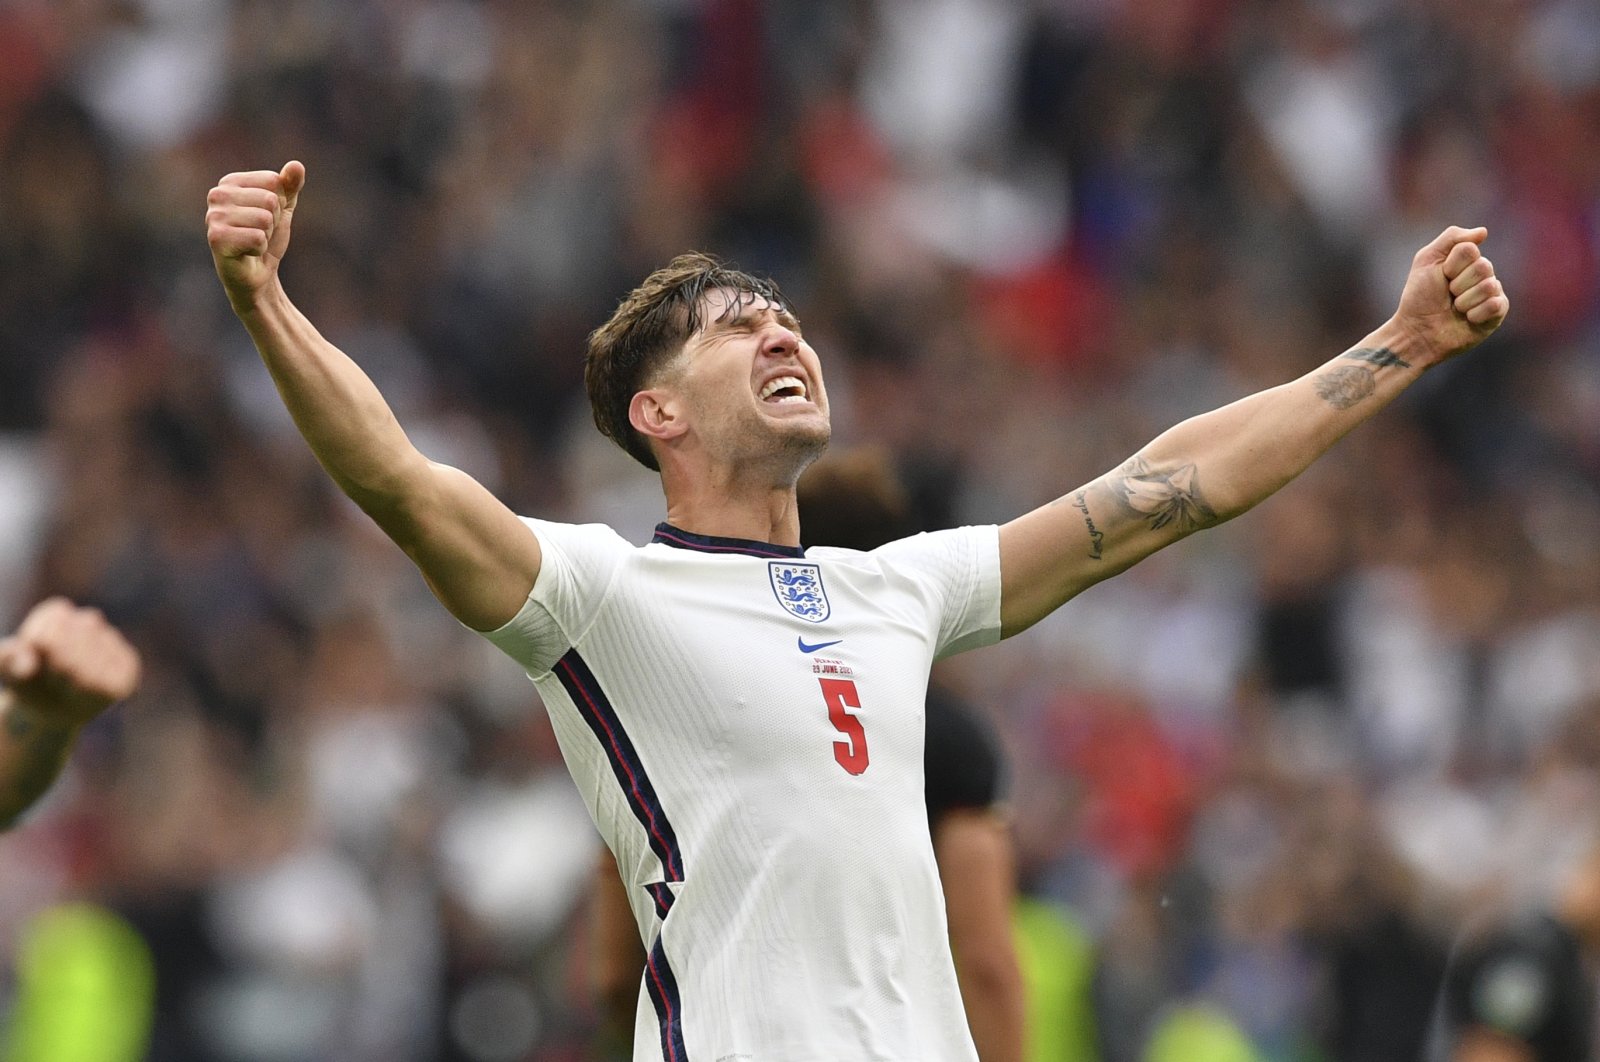 England's John Stones celebrates at the end of the Euro 2020 round of 16 match against Germany at Wembley Stadium in London, England, June 29, 2021. (AP Photo)